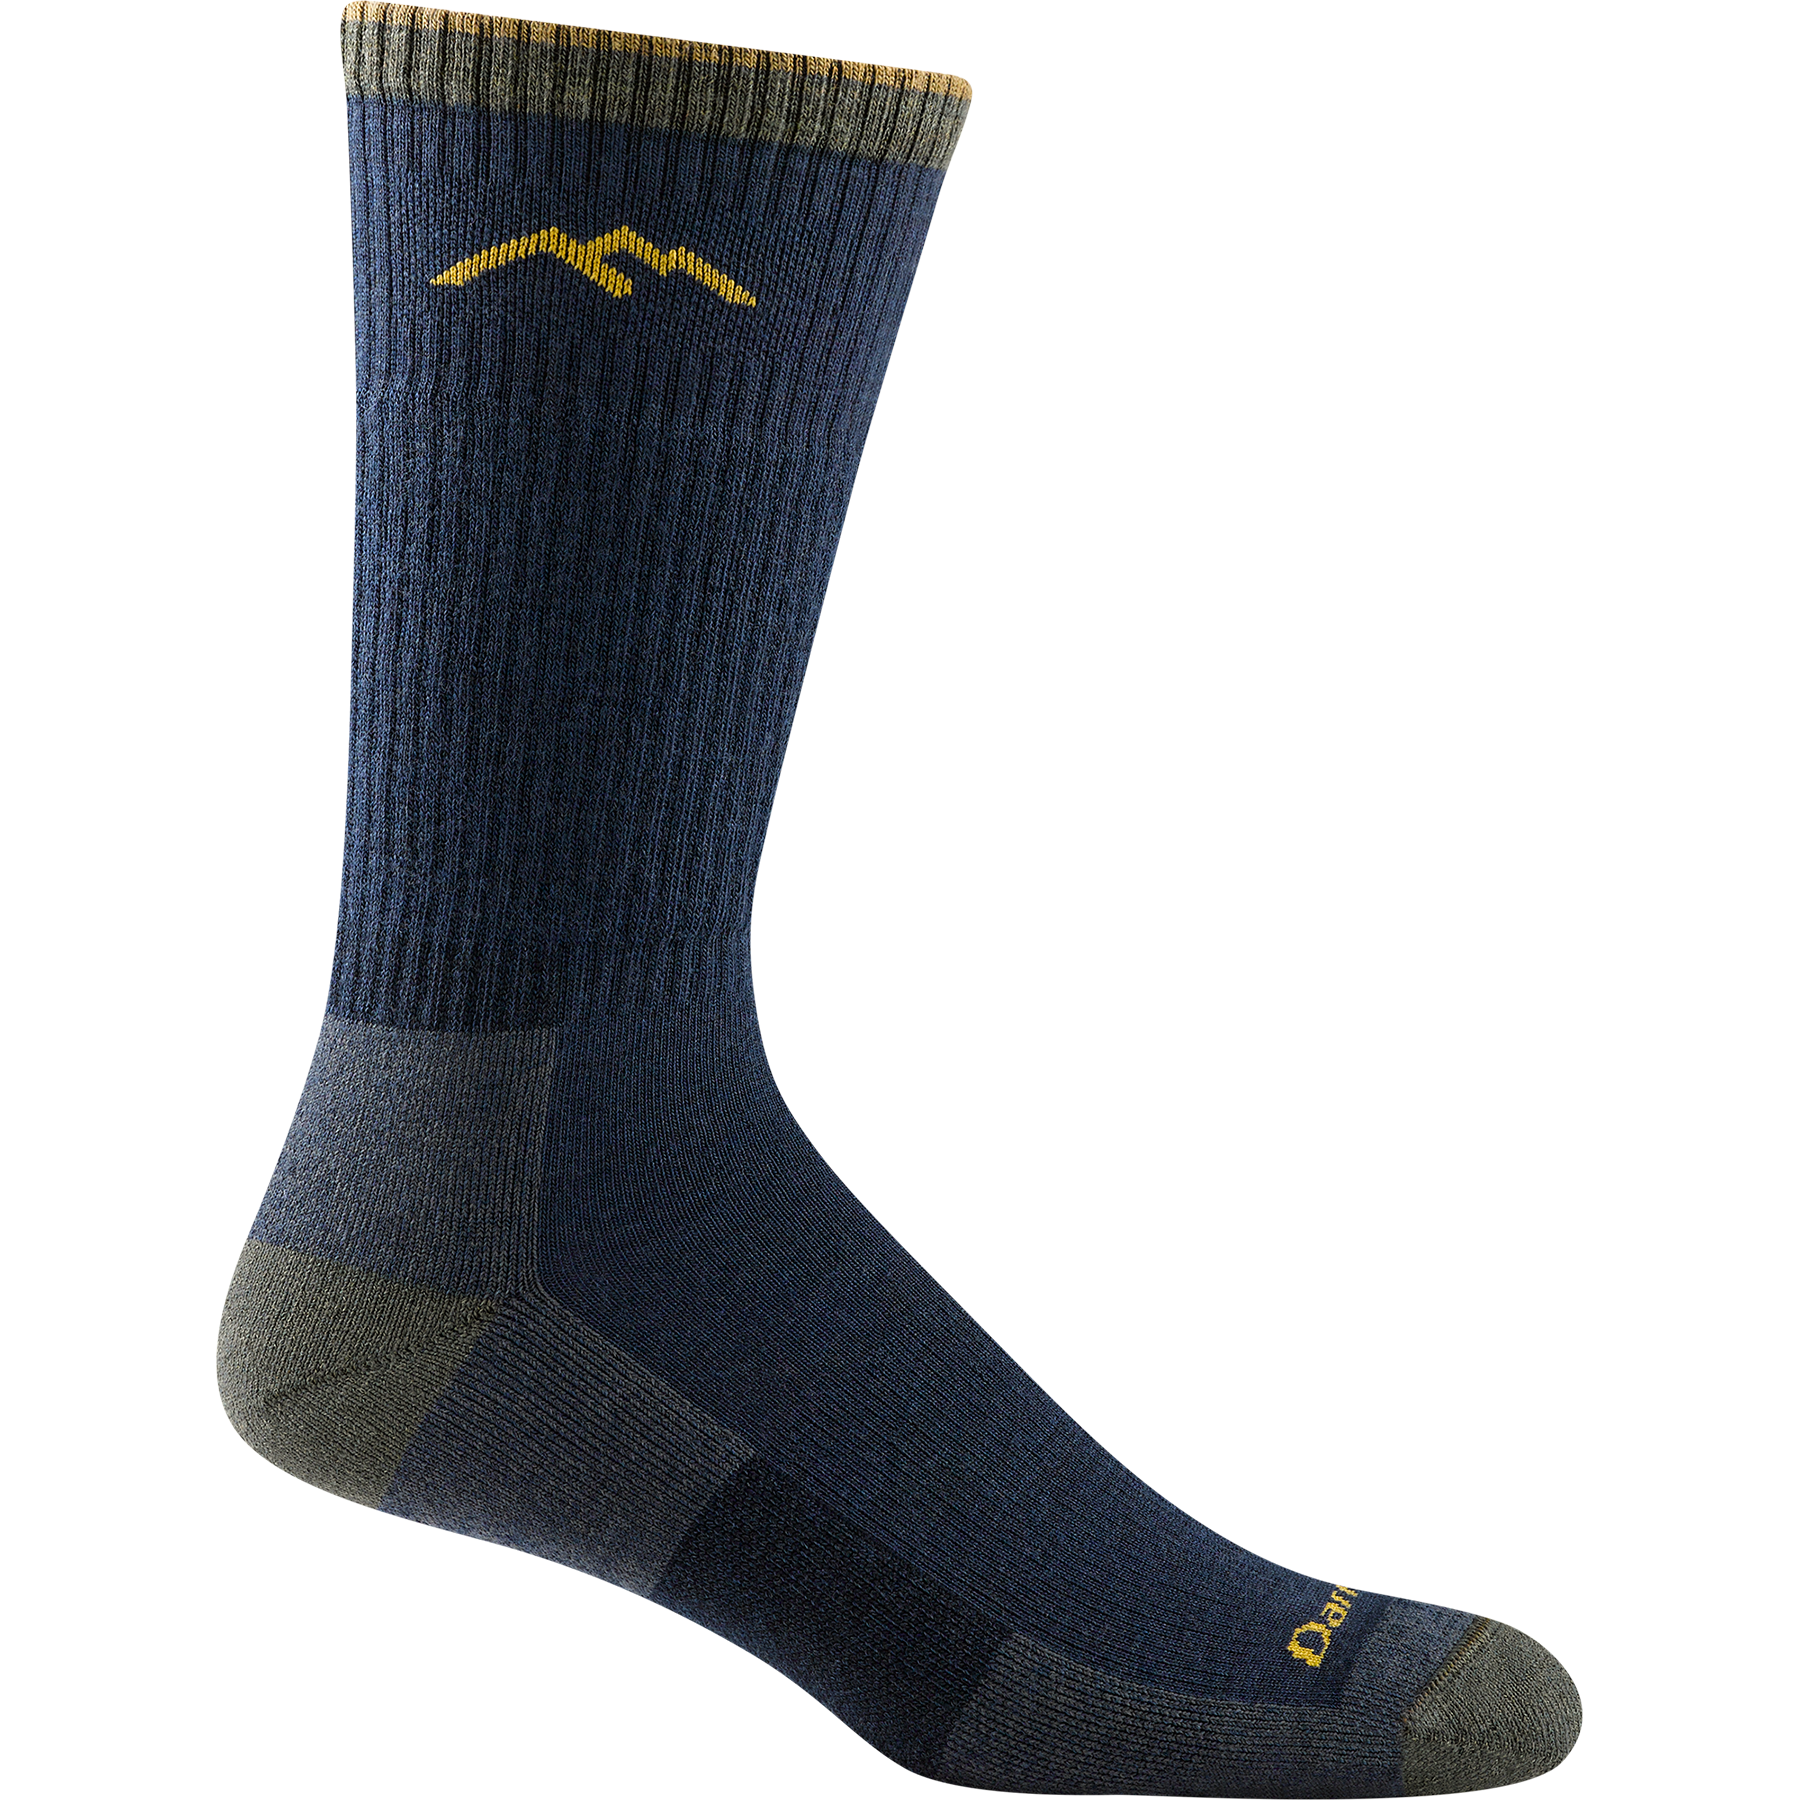 Darn tough navy blue sock with yellow mountain outline detail, green toe and heel